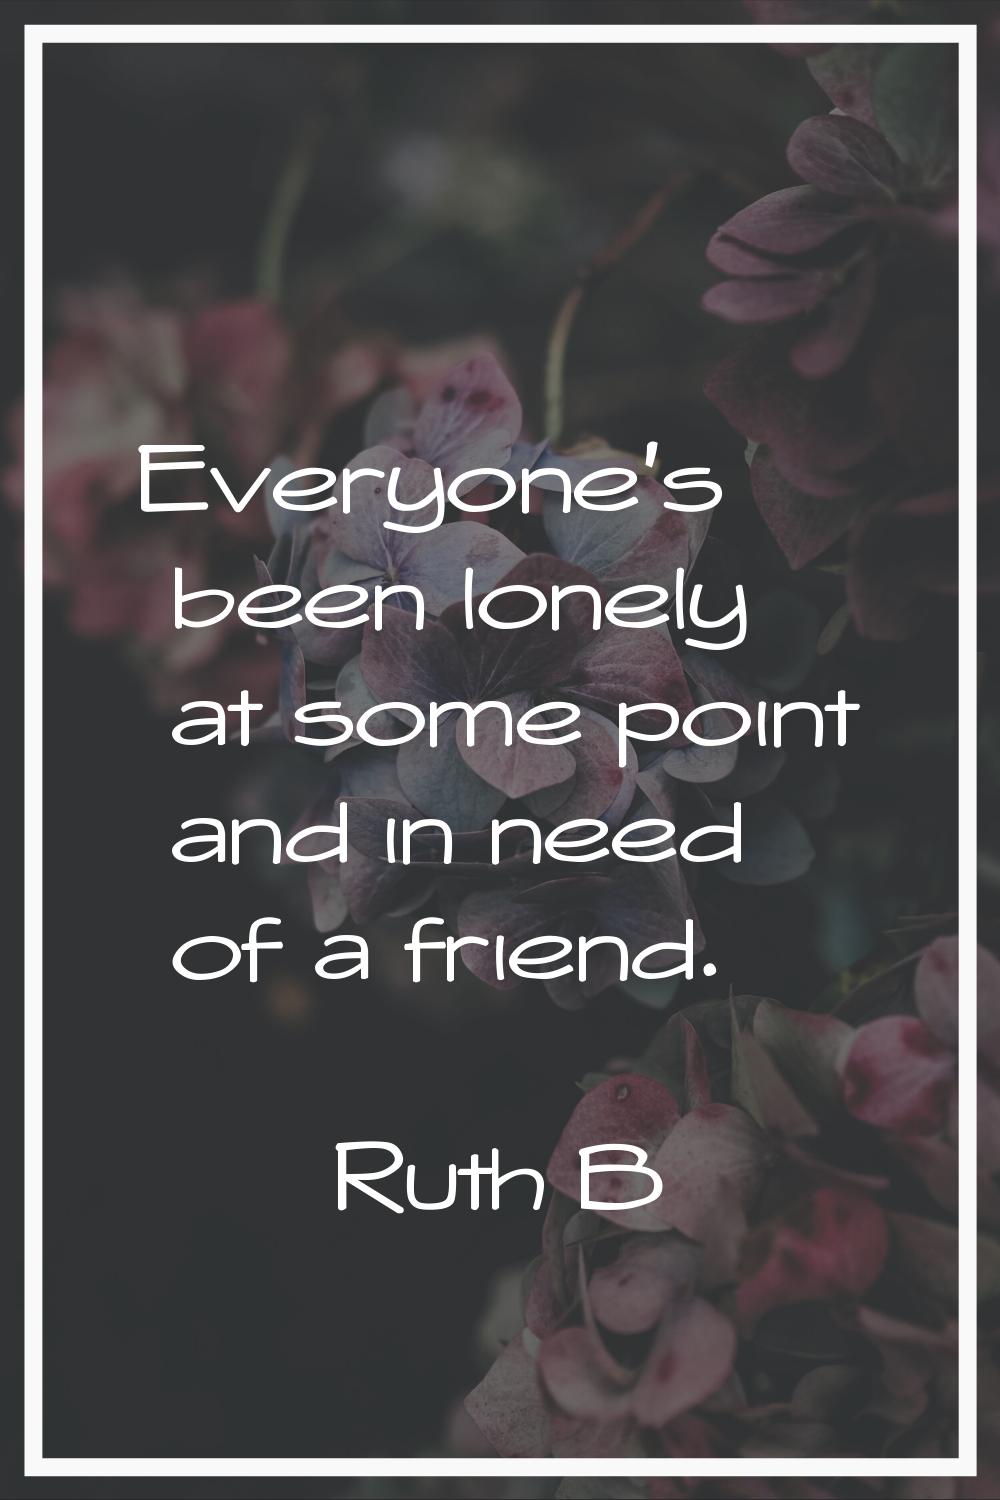 Everyone's been lonely at some point and in need of a friend.